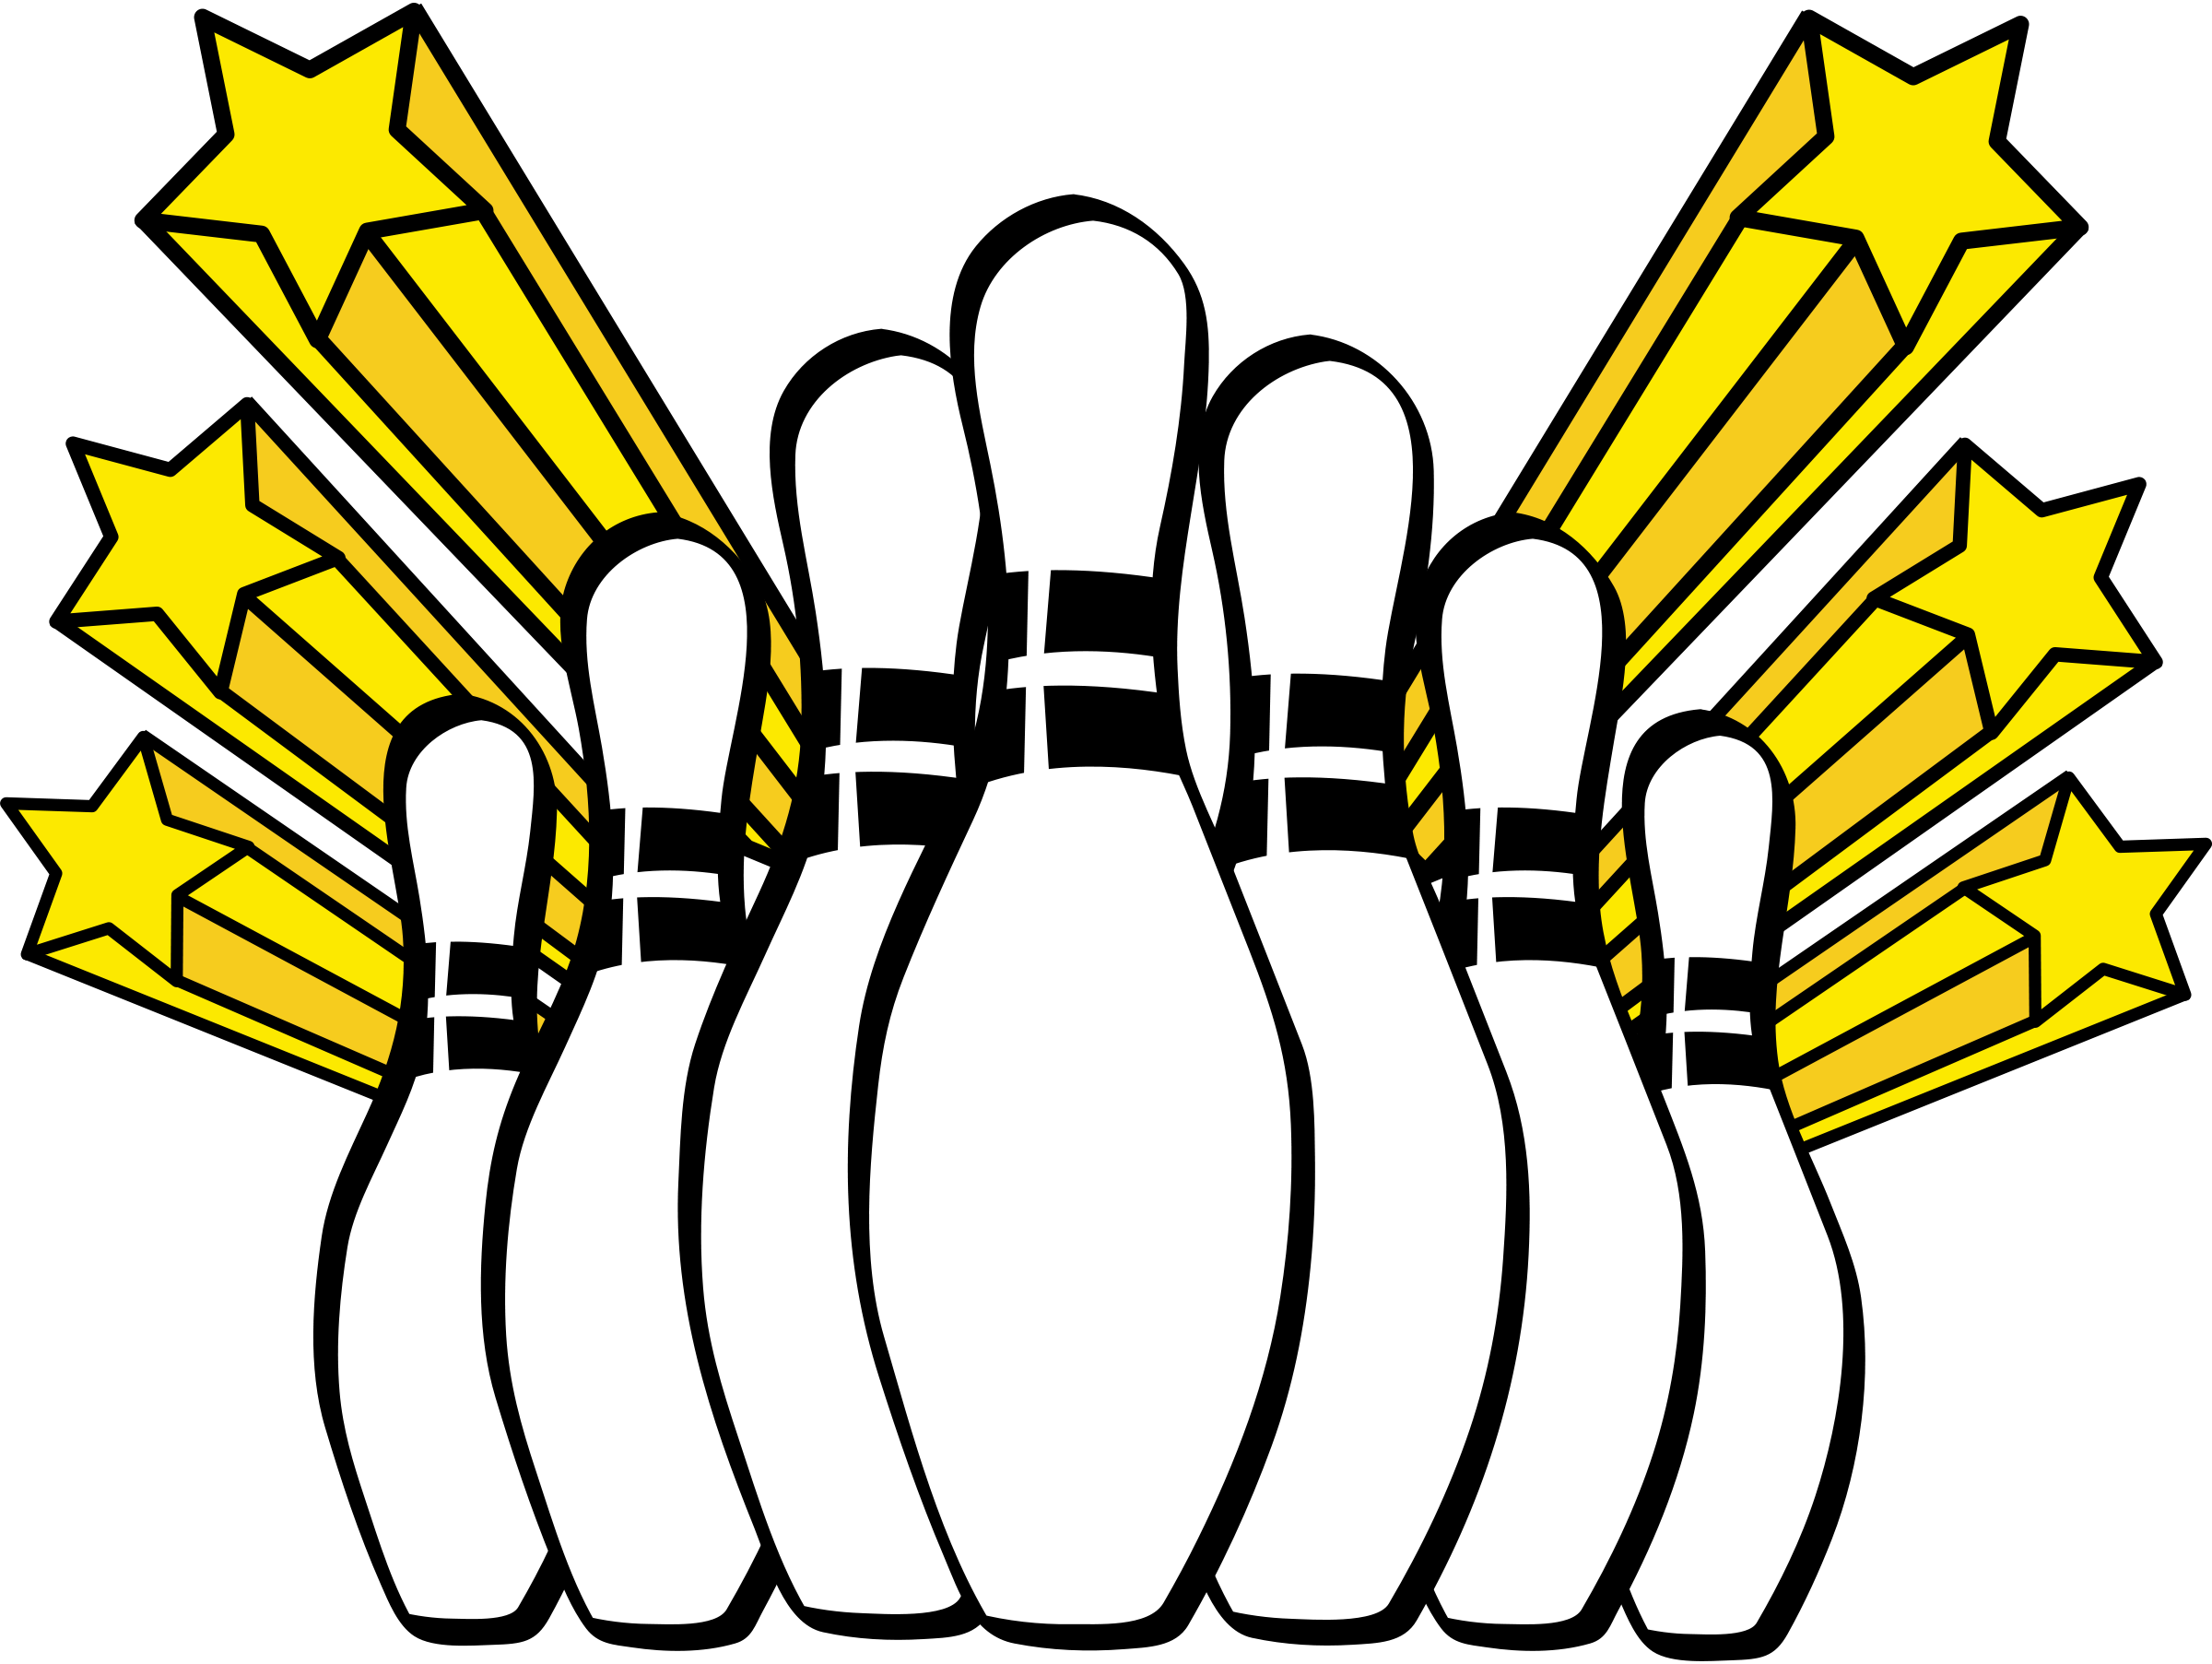 Images For Bowling Clip Art Black And White. 7e311b2be358c4112ea706840e24ca